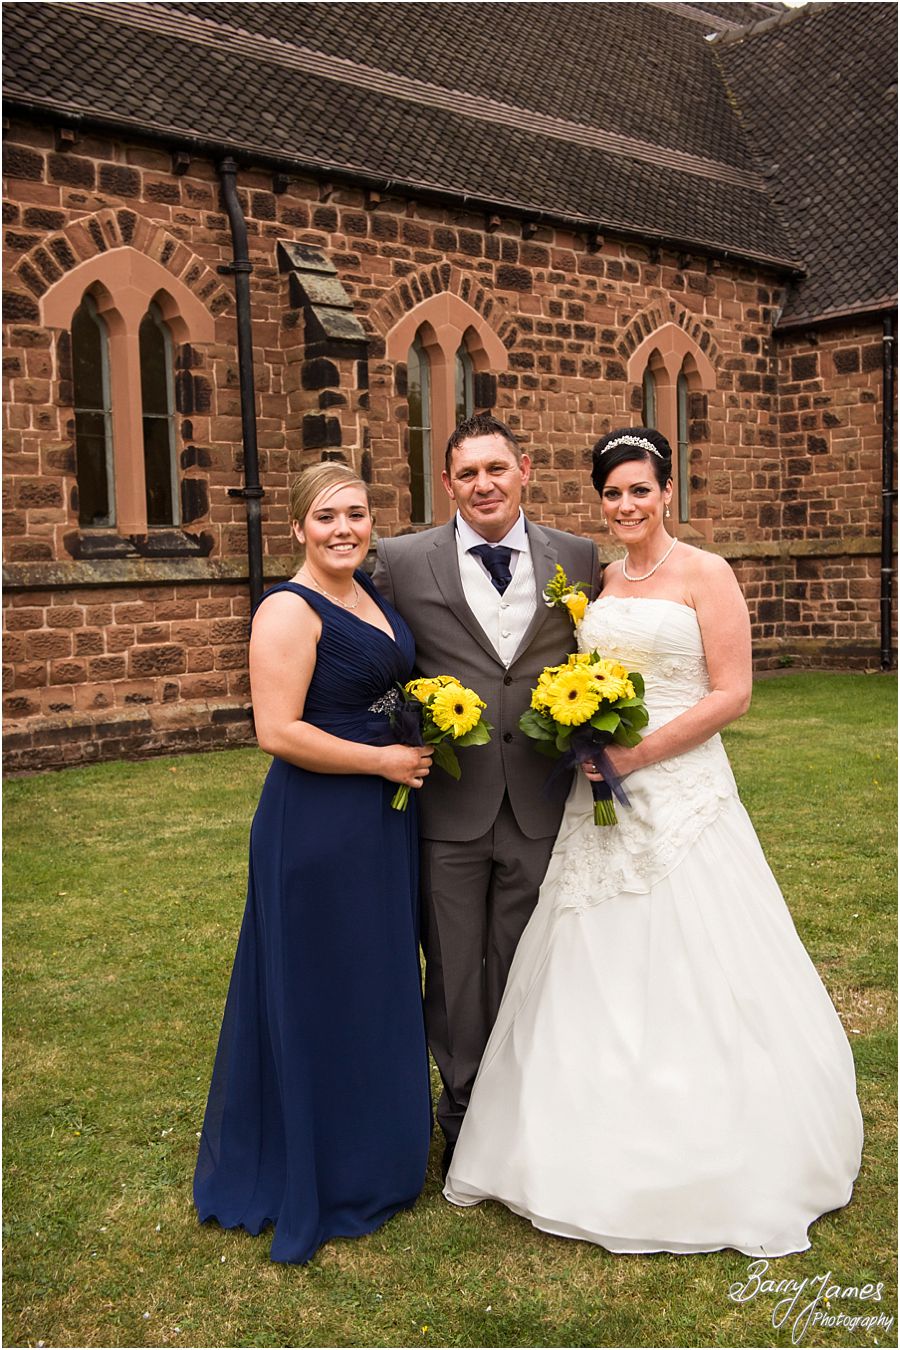 Contemporary and creative wedding photographs at St James Church in Brownhills by Experienced Contemporary Candid and Creative Wedding Photographer Barry James